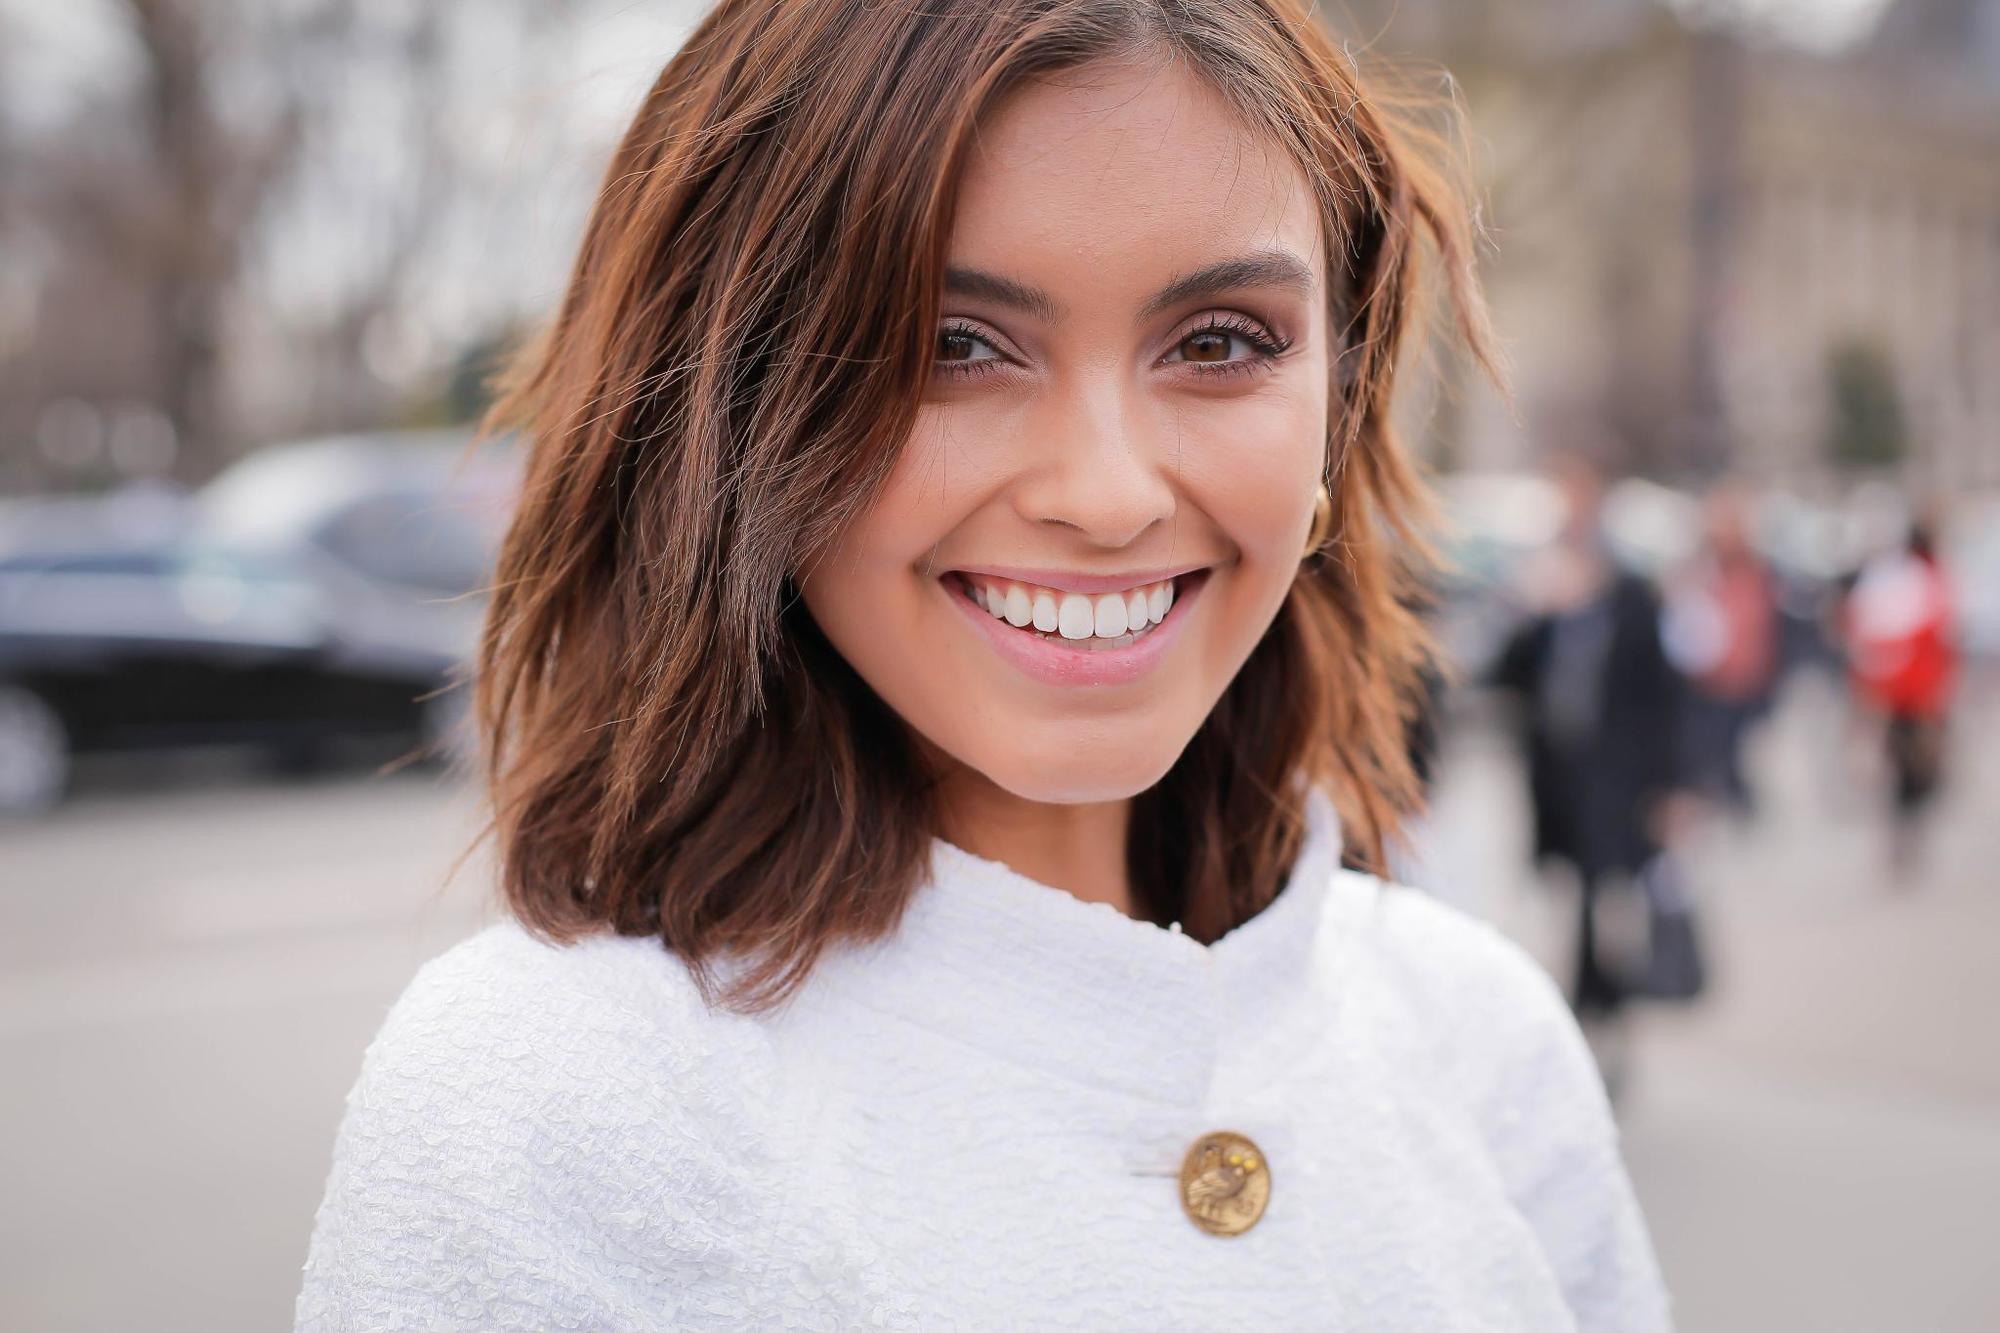 Top 10 Newest Short Hairstyles for Women Post-College 6